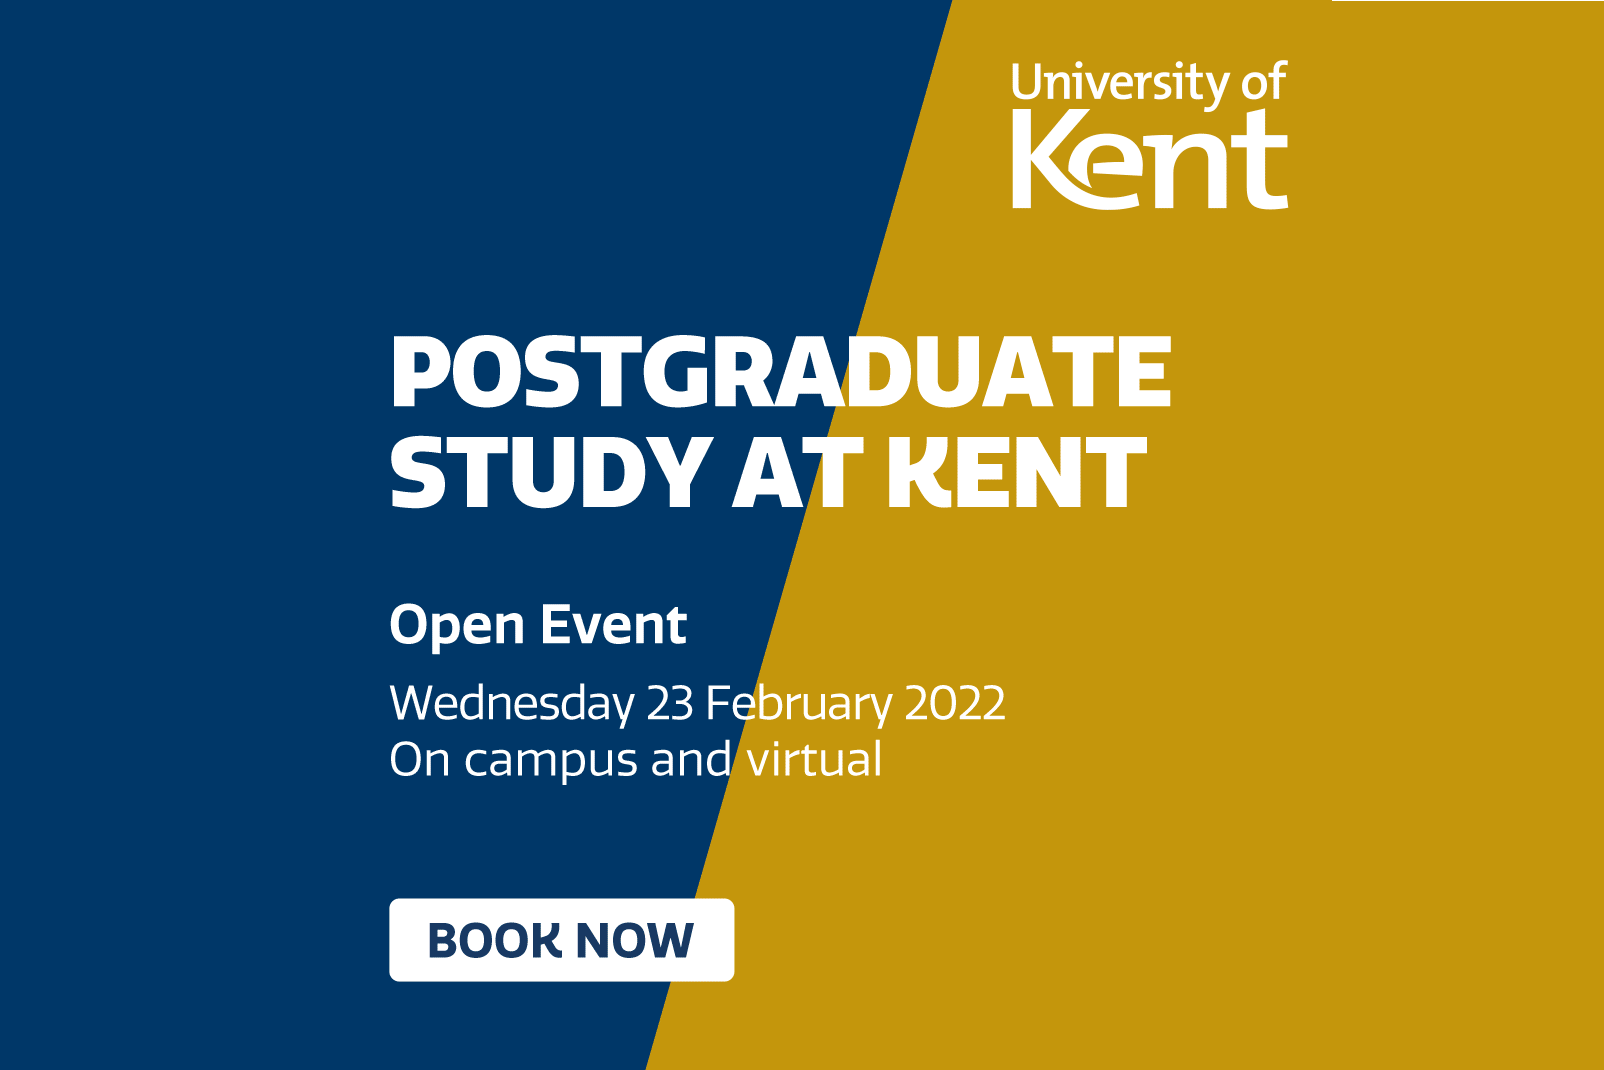 Postgraduate study at Kent. Open Event. Wednesday 23 February 2022. On campus and virtual.